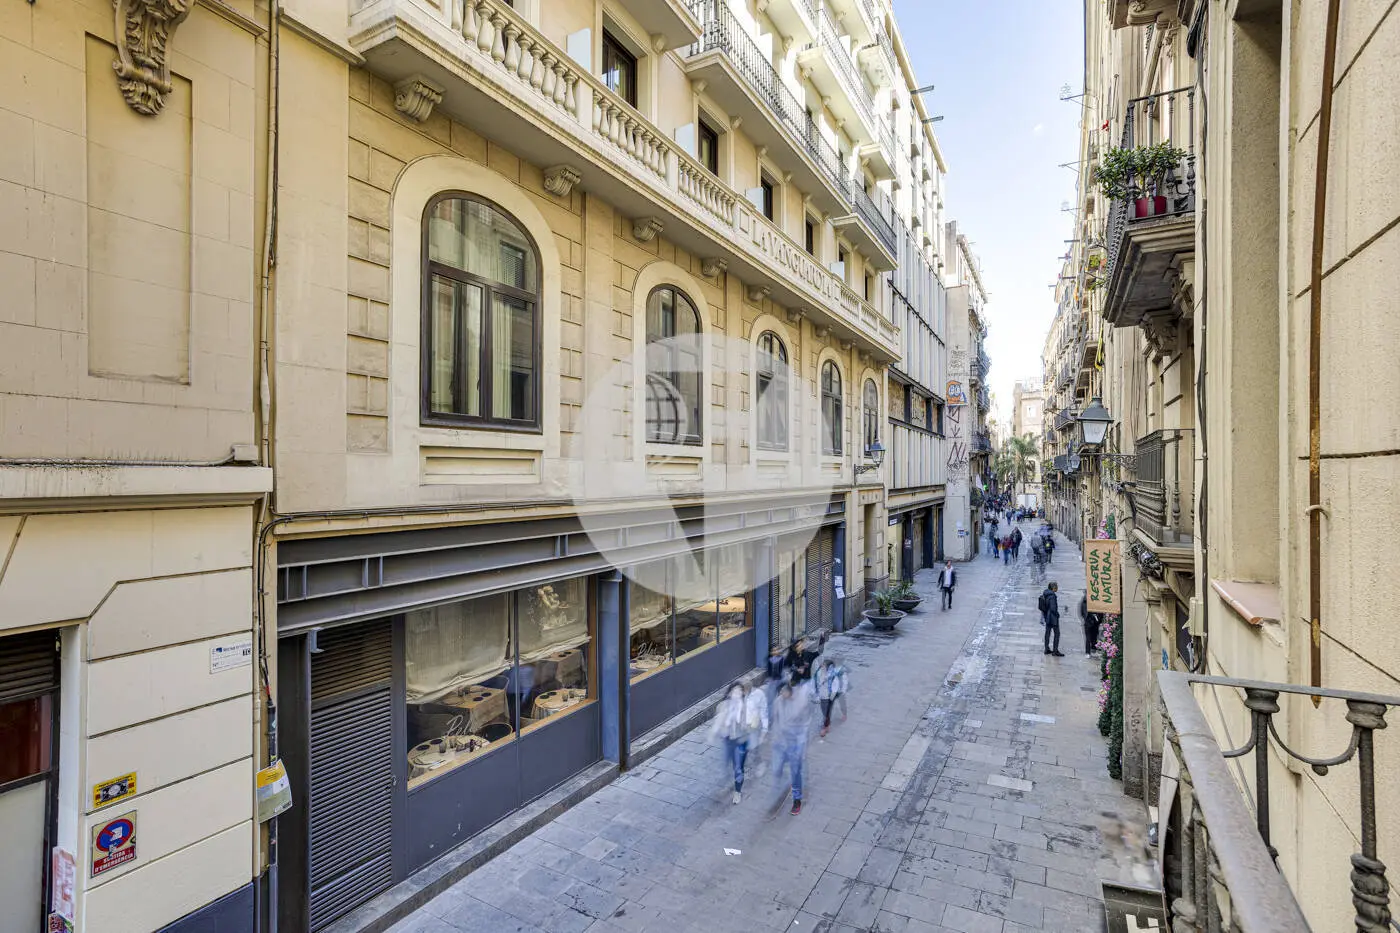 Magnificent apartment for sale next to Pl Universitat of 114m2 according to the land registry, located on Tallers Street in the Ciutat Vella neighborhood of Barcelona 31